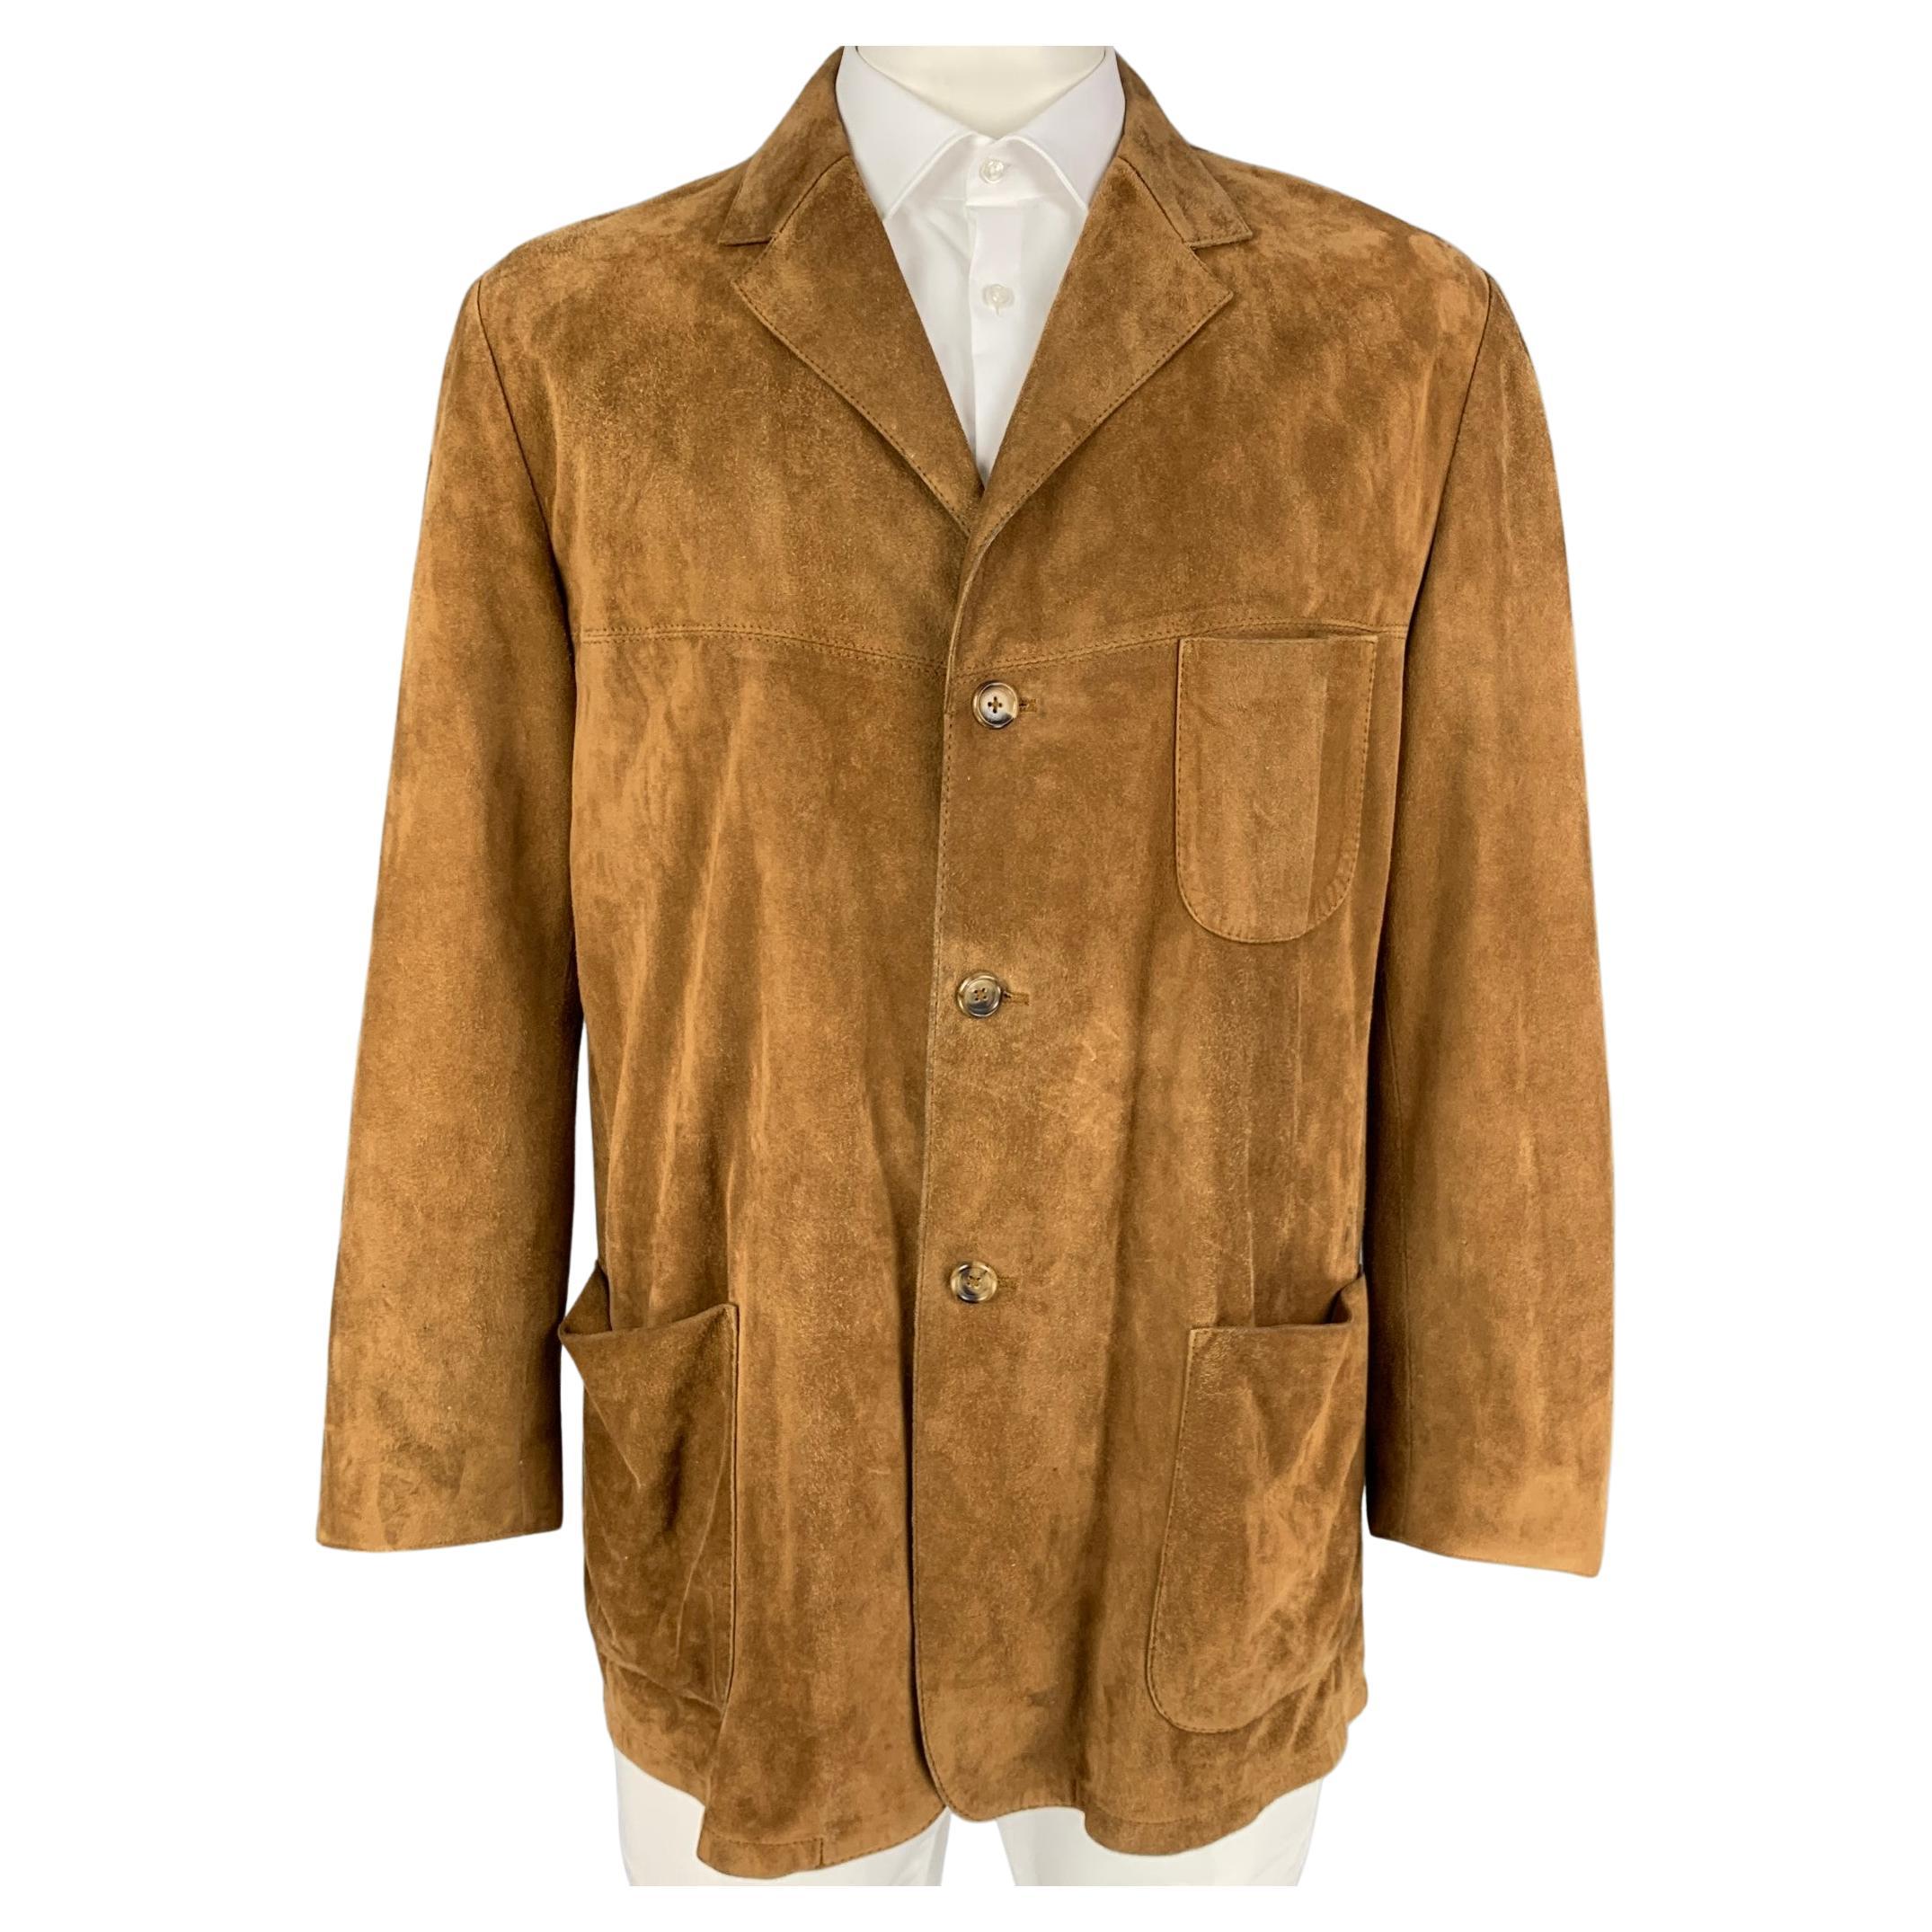 SALFRA for BERGDORF GOODMAN Size 46 Tan Suede Single Breasted Sport Coat